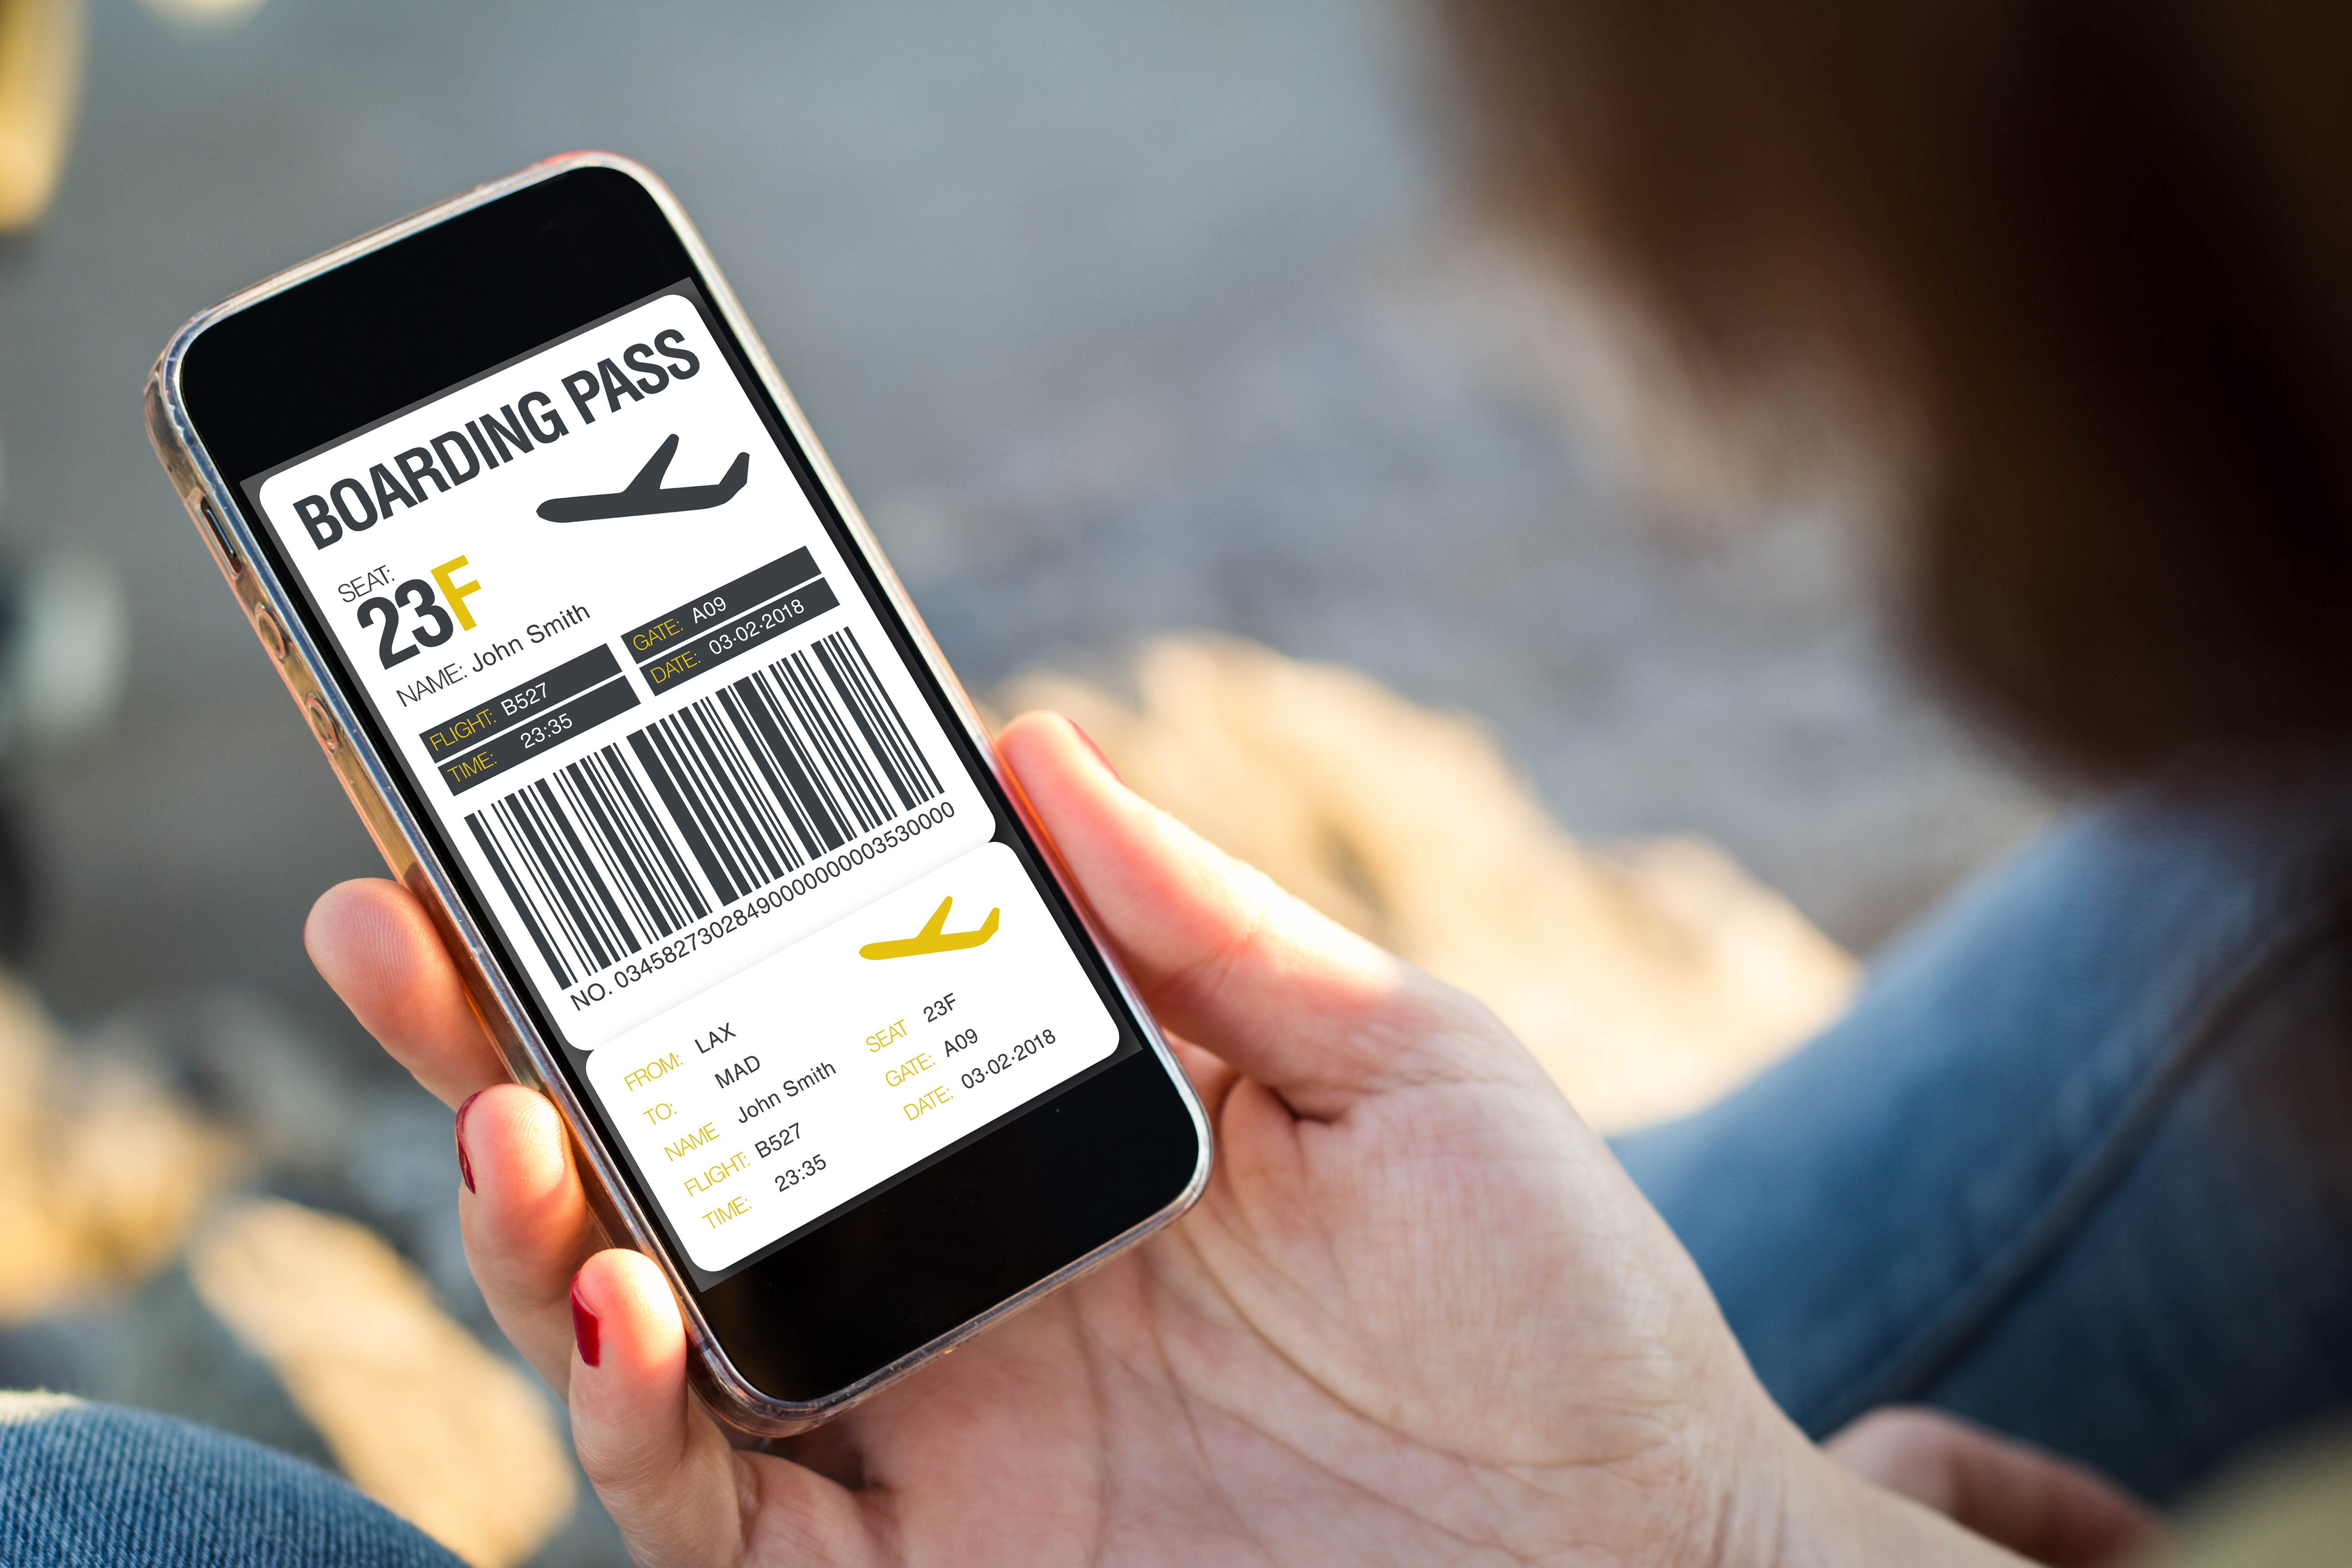 Accessibility Challenges in Airline Ticket Booking on Mobile